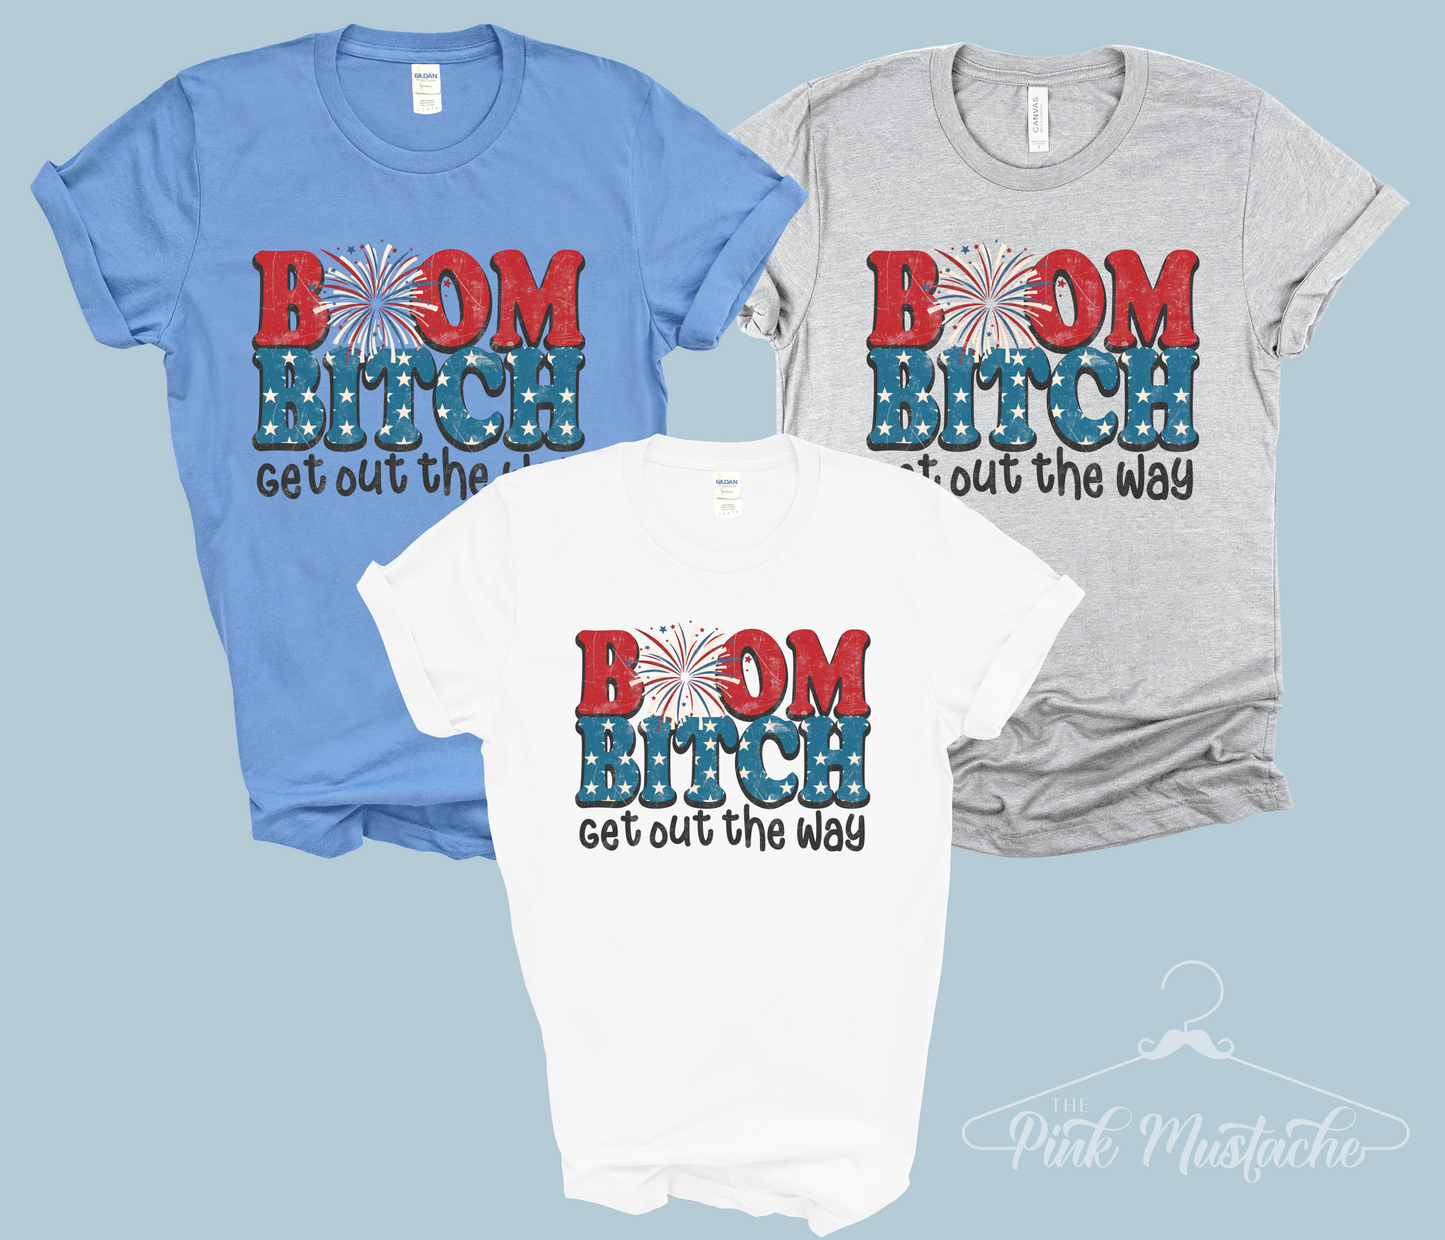 Boom Get Out The Way Funny July 4th Tee/ Unisex Adult Shirt / Memorial Day July 4th Tee/ Retro Style Shirt